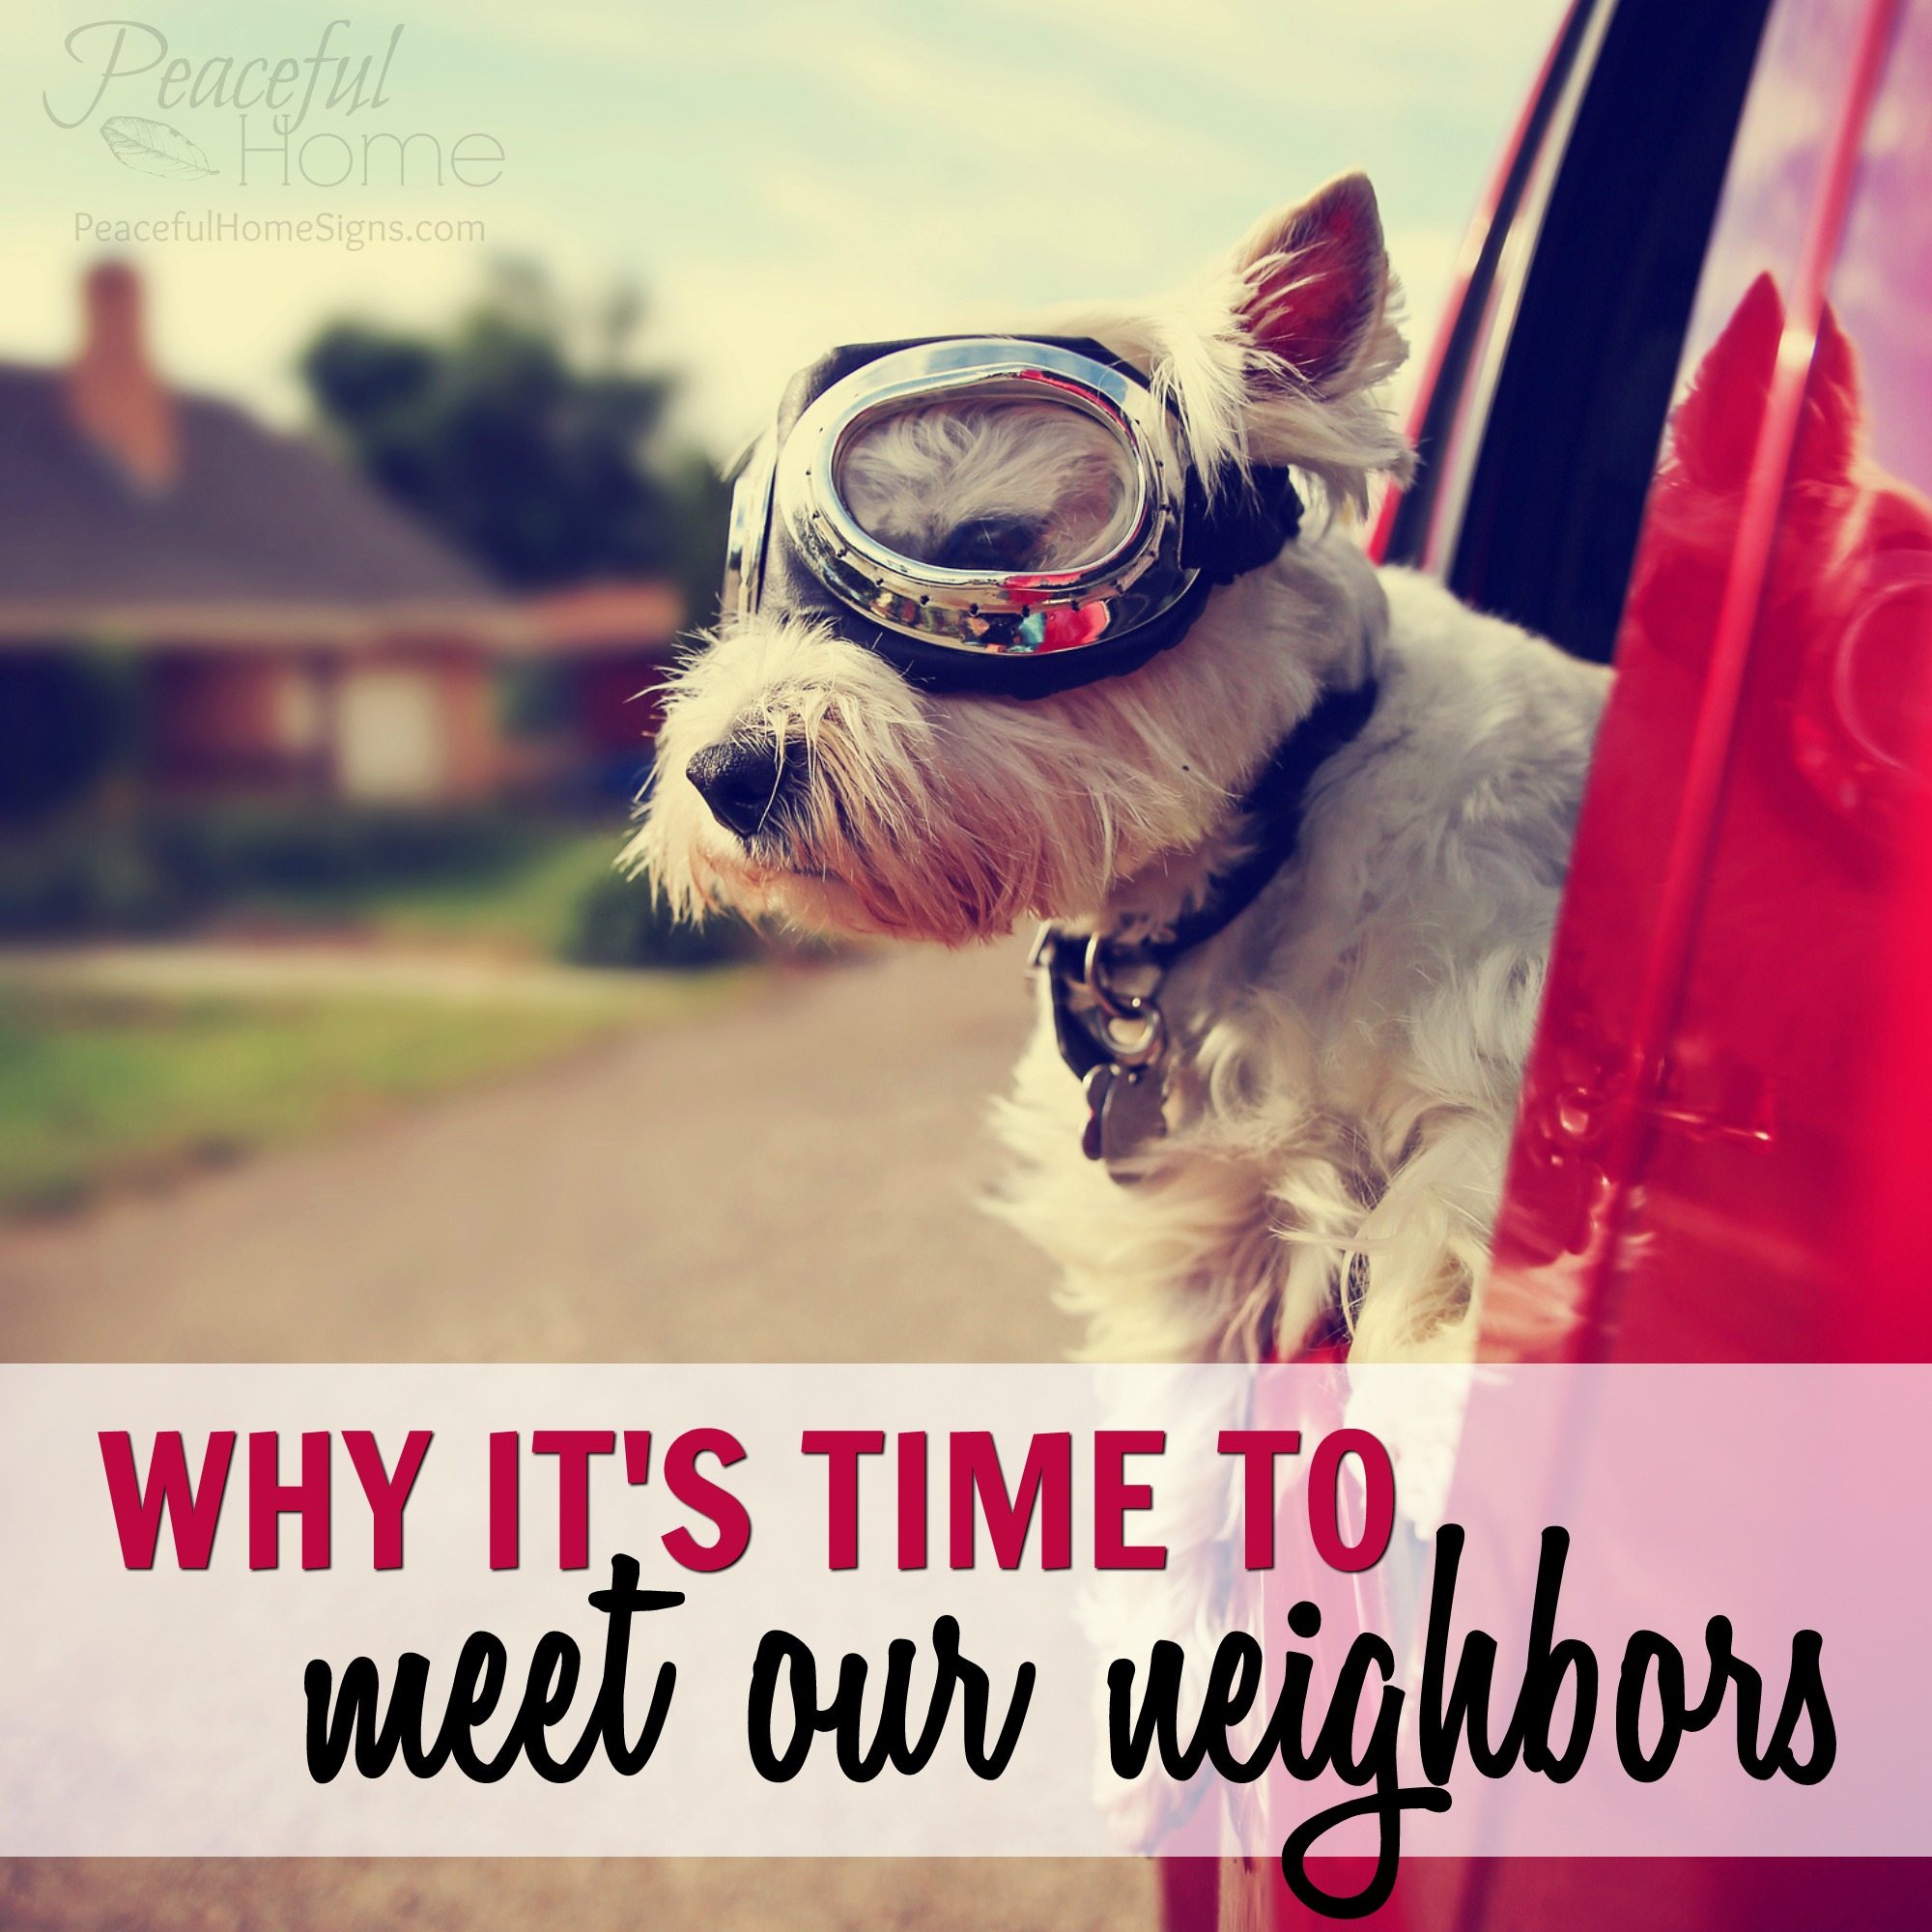 Why it’s time to meet our neighbors